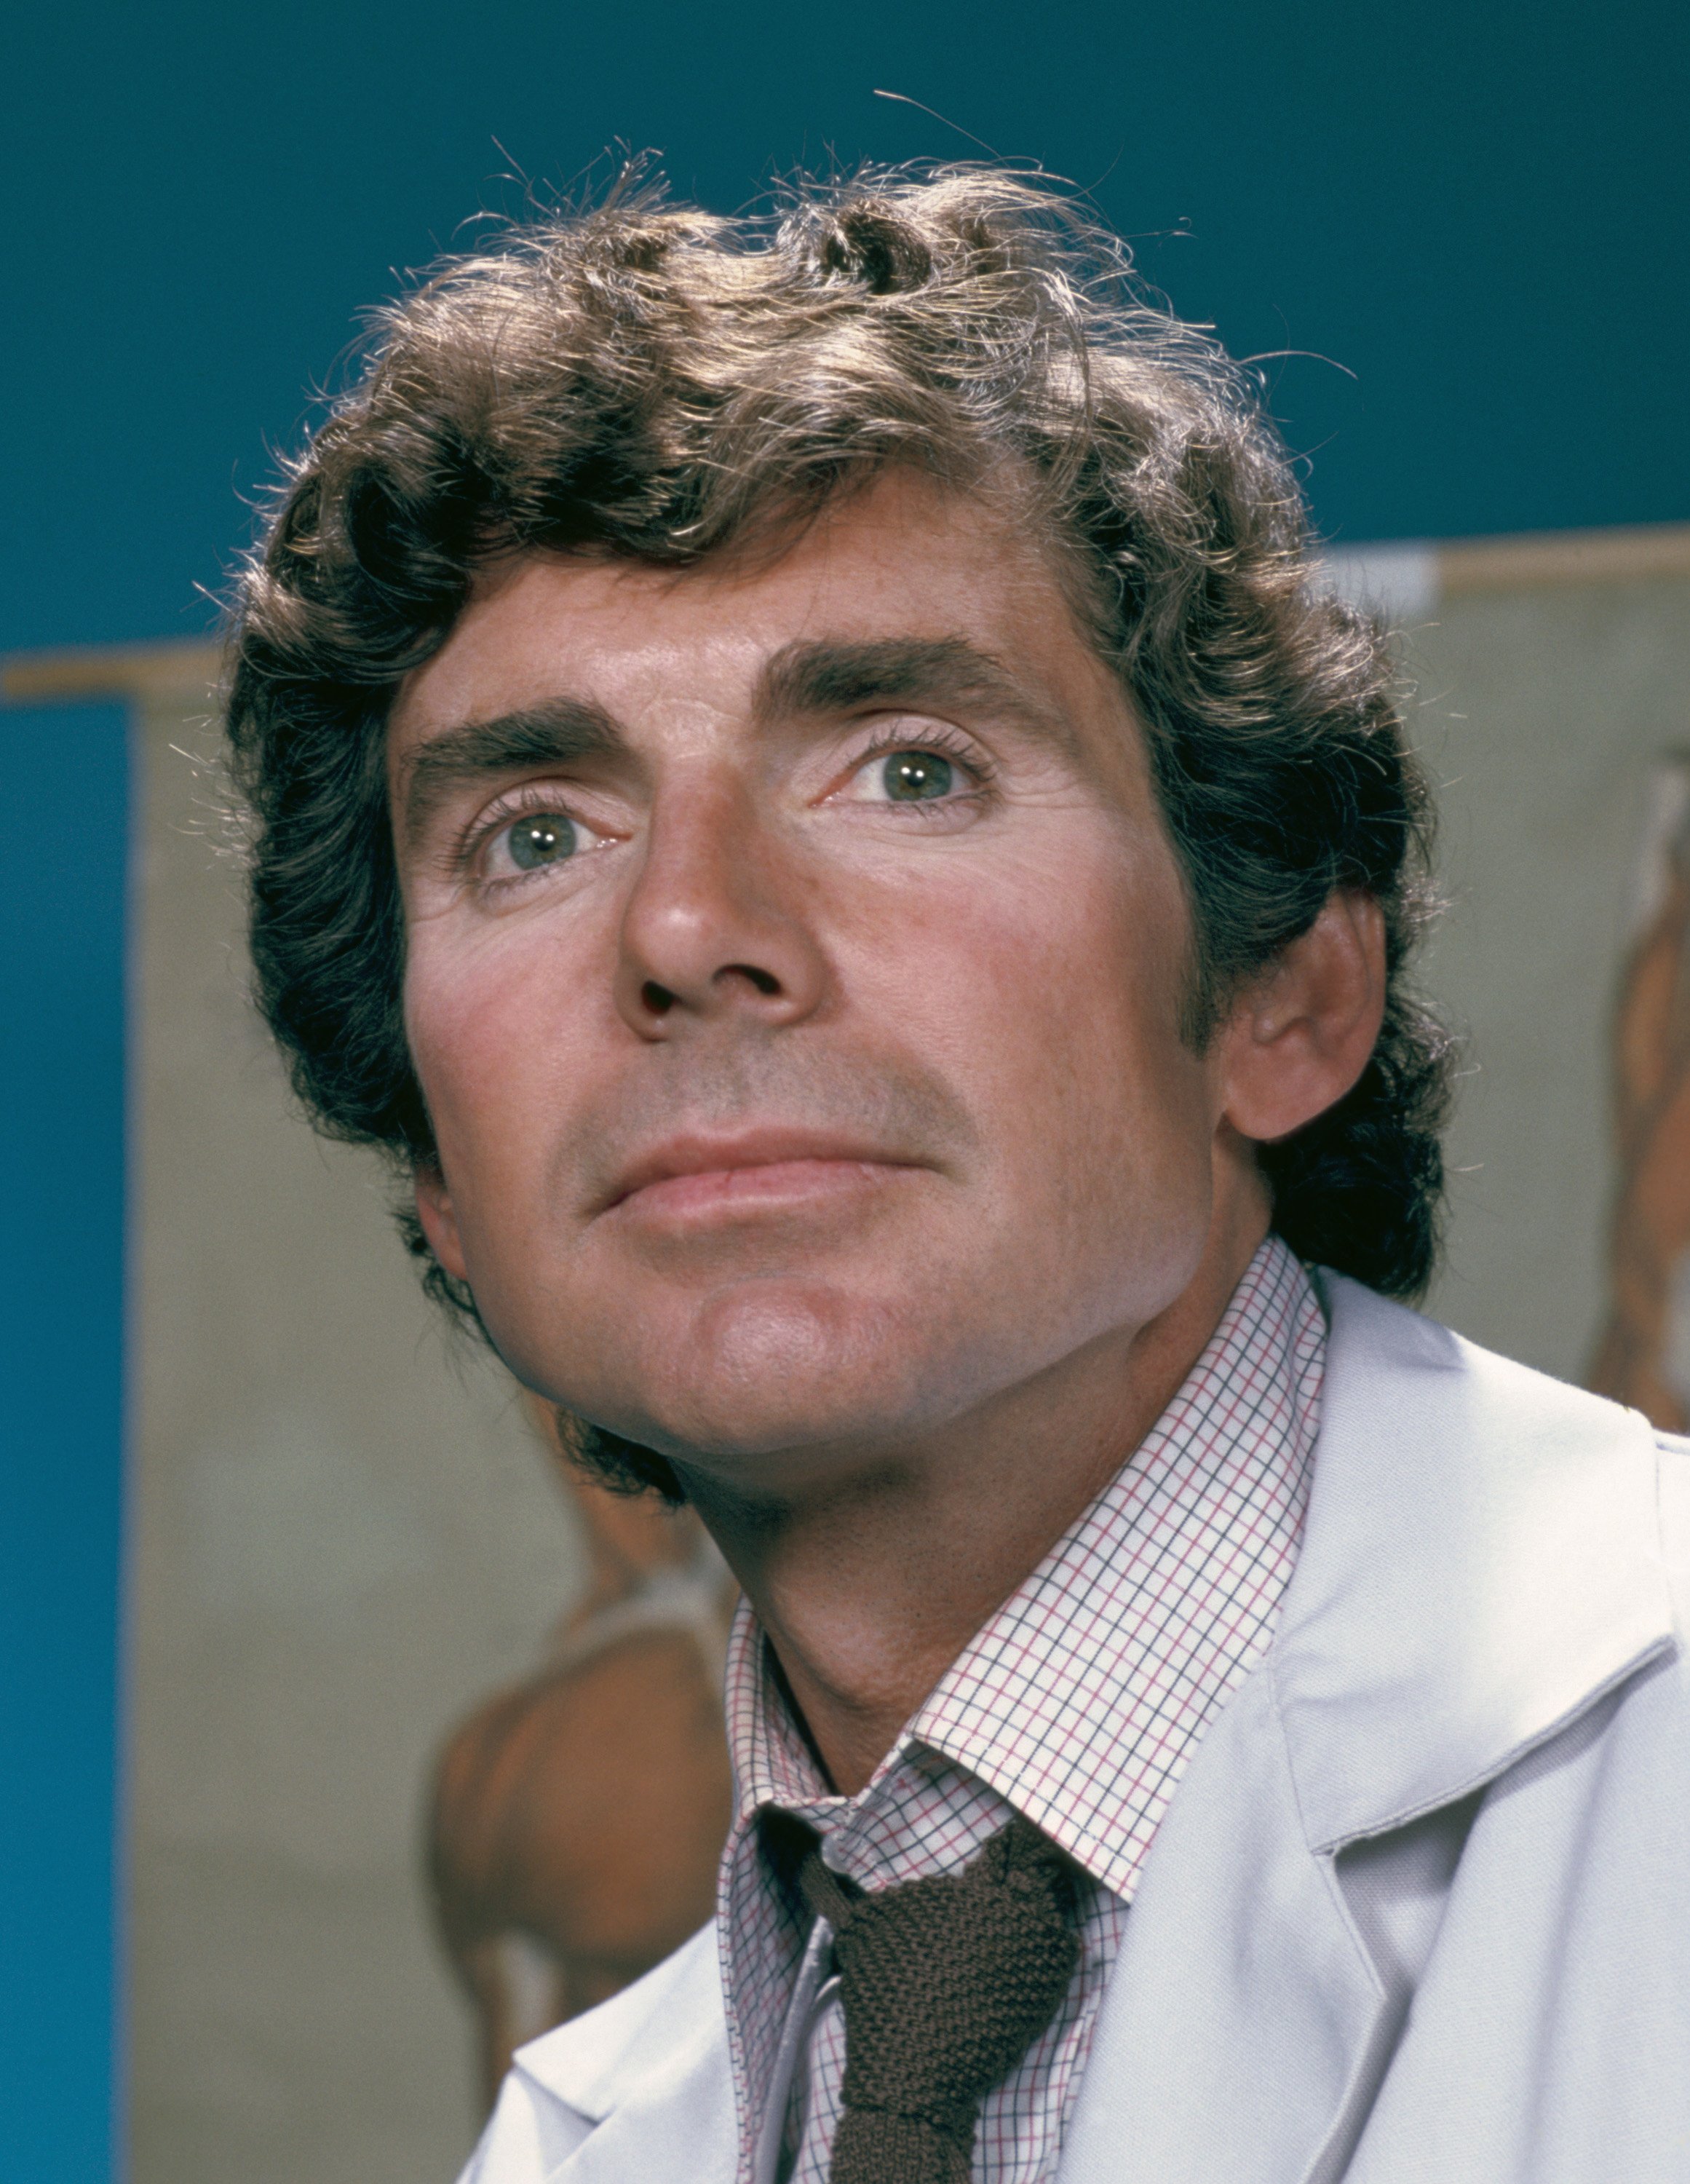 Photo of David Birney as Dr. Ben Samuels on "St. Elsewhere" | Source: Getty Images